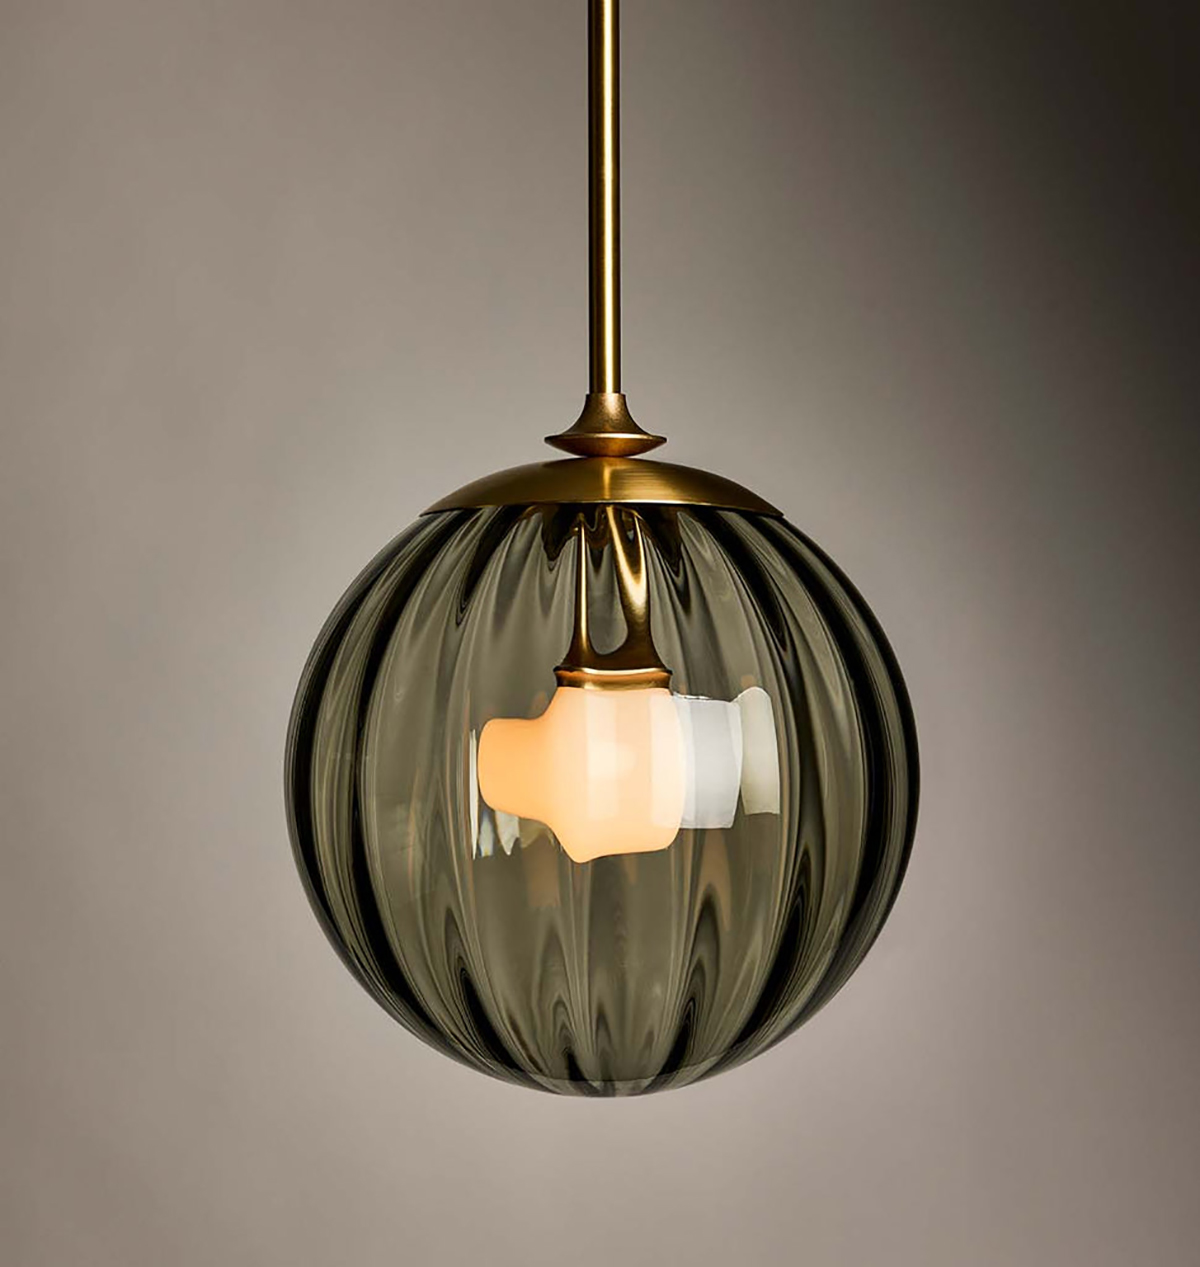 THE ROLL AND HILL PENDANT 01 GLOBE par Roll & Hill